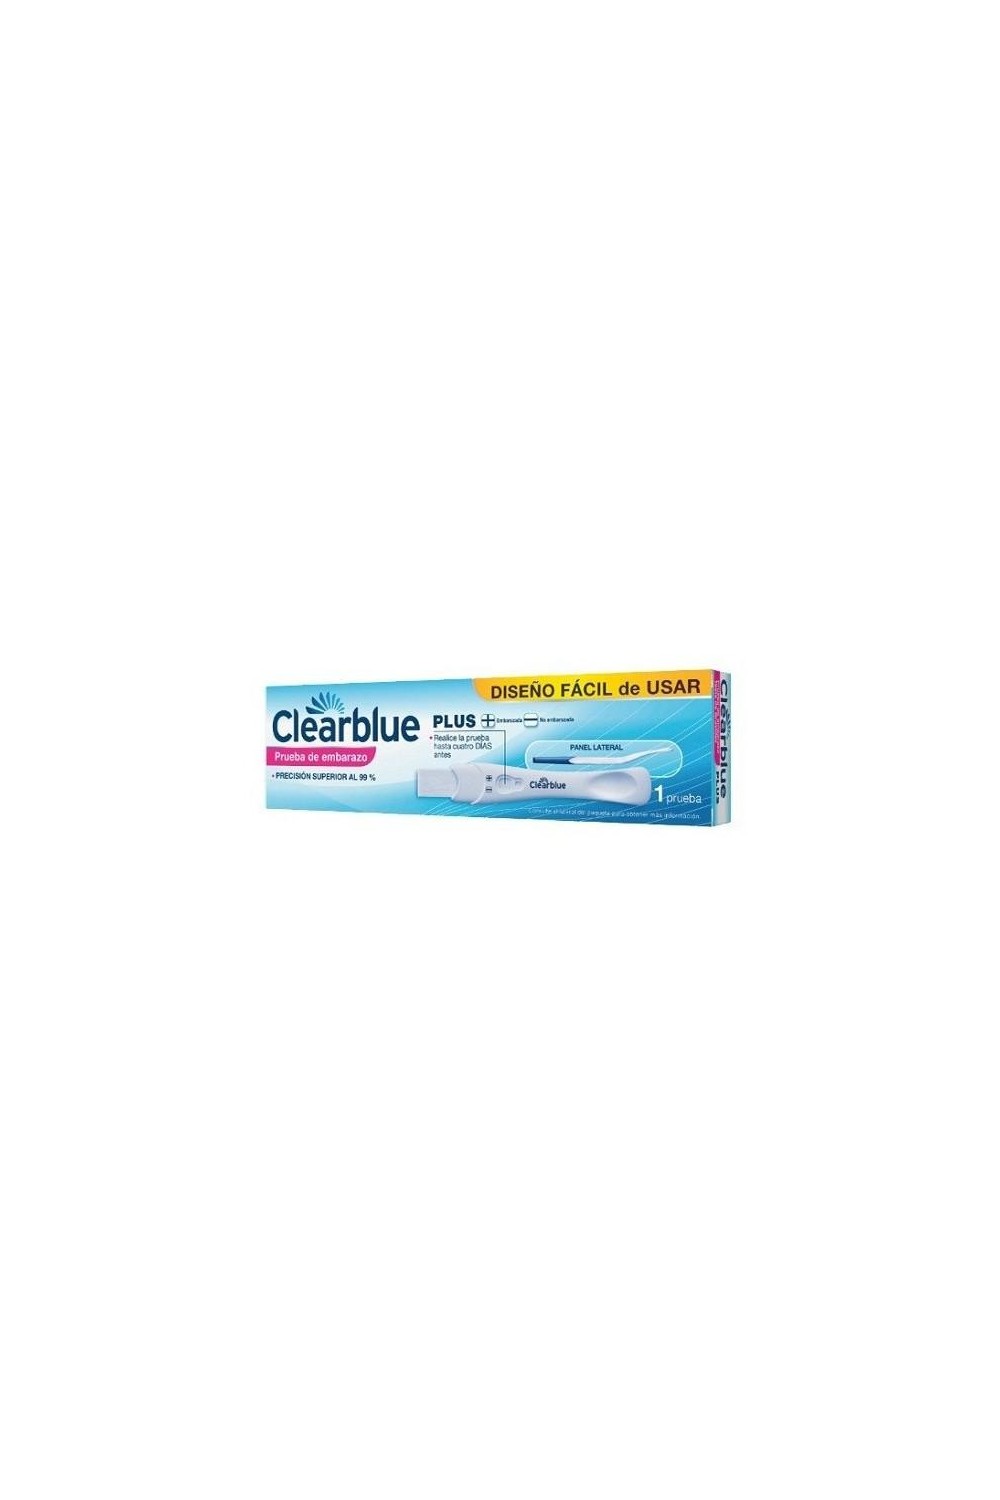 Clearblue Analogue Pregnancy Test